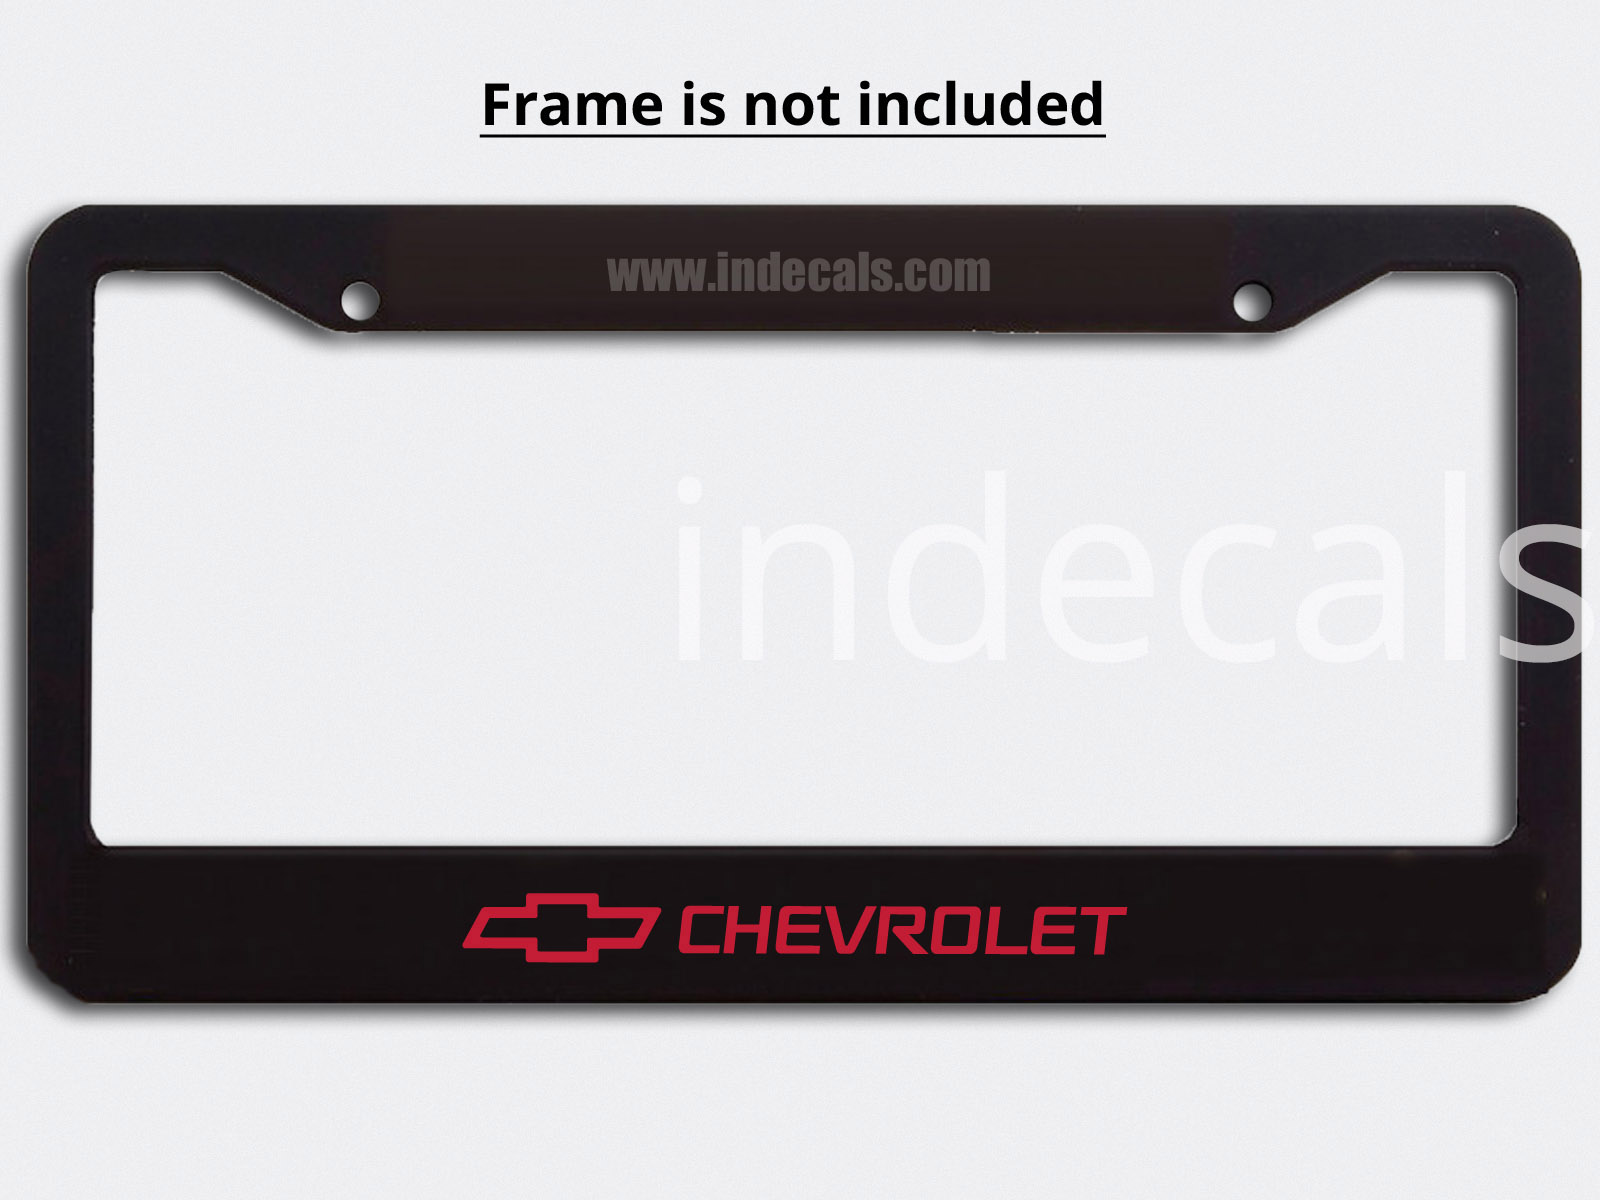 3 x Chevrolet Stickers for Plate Frame - Red